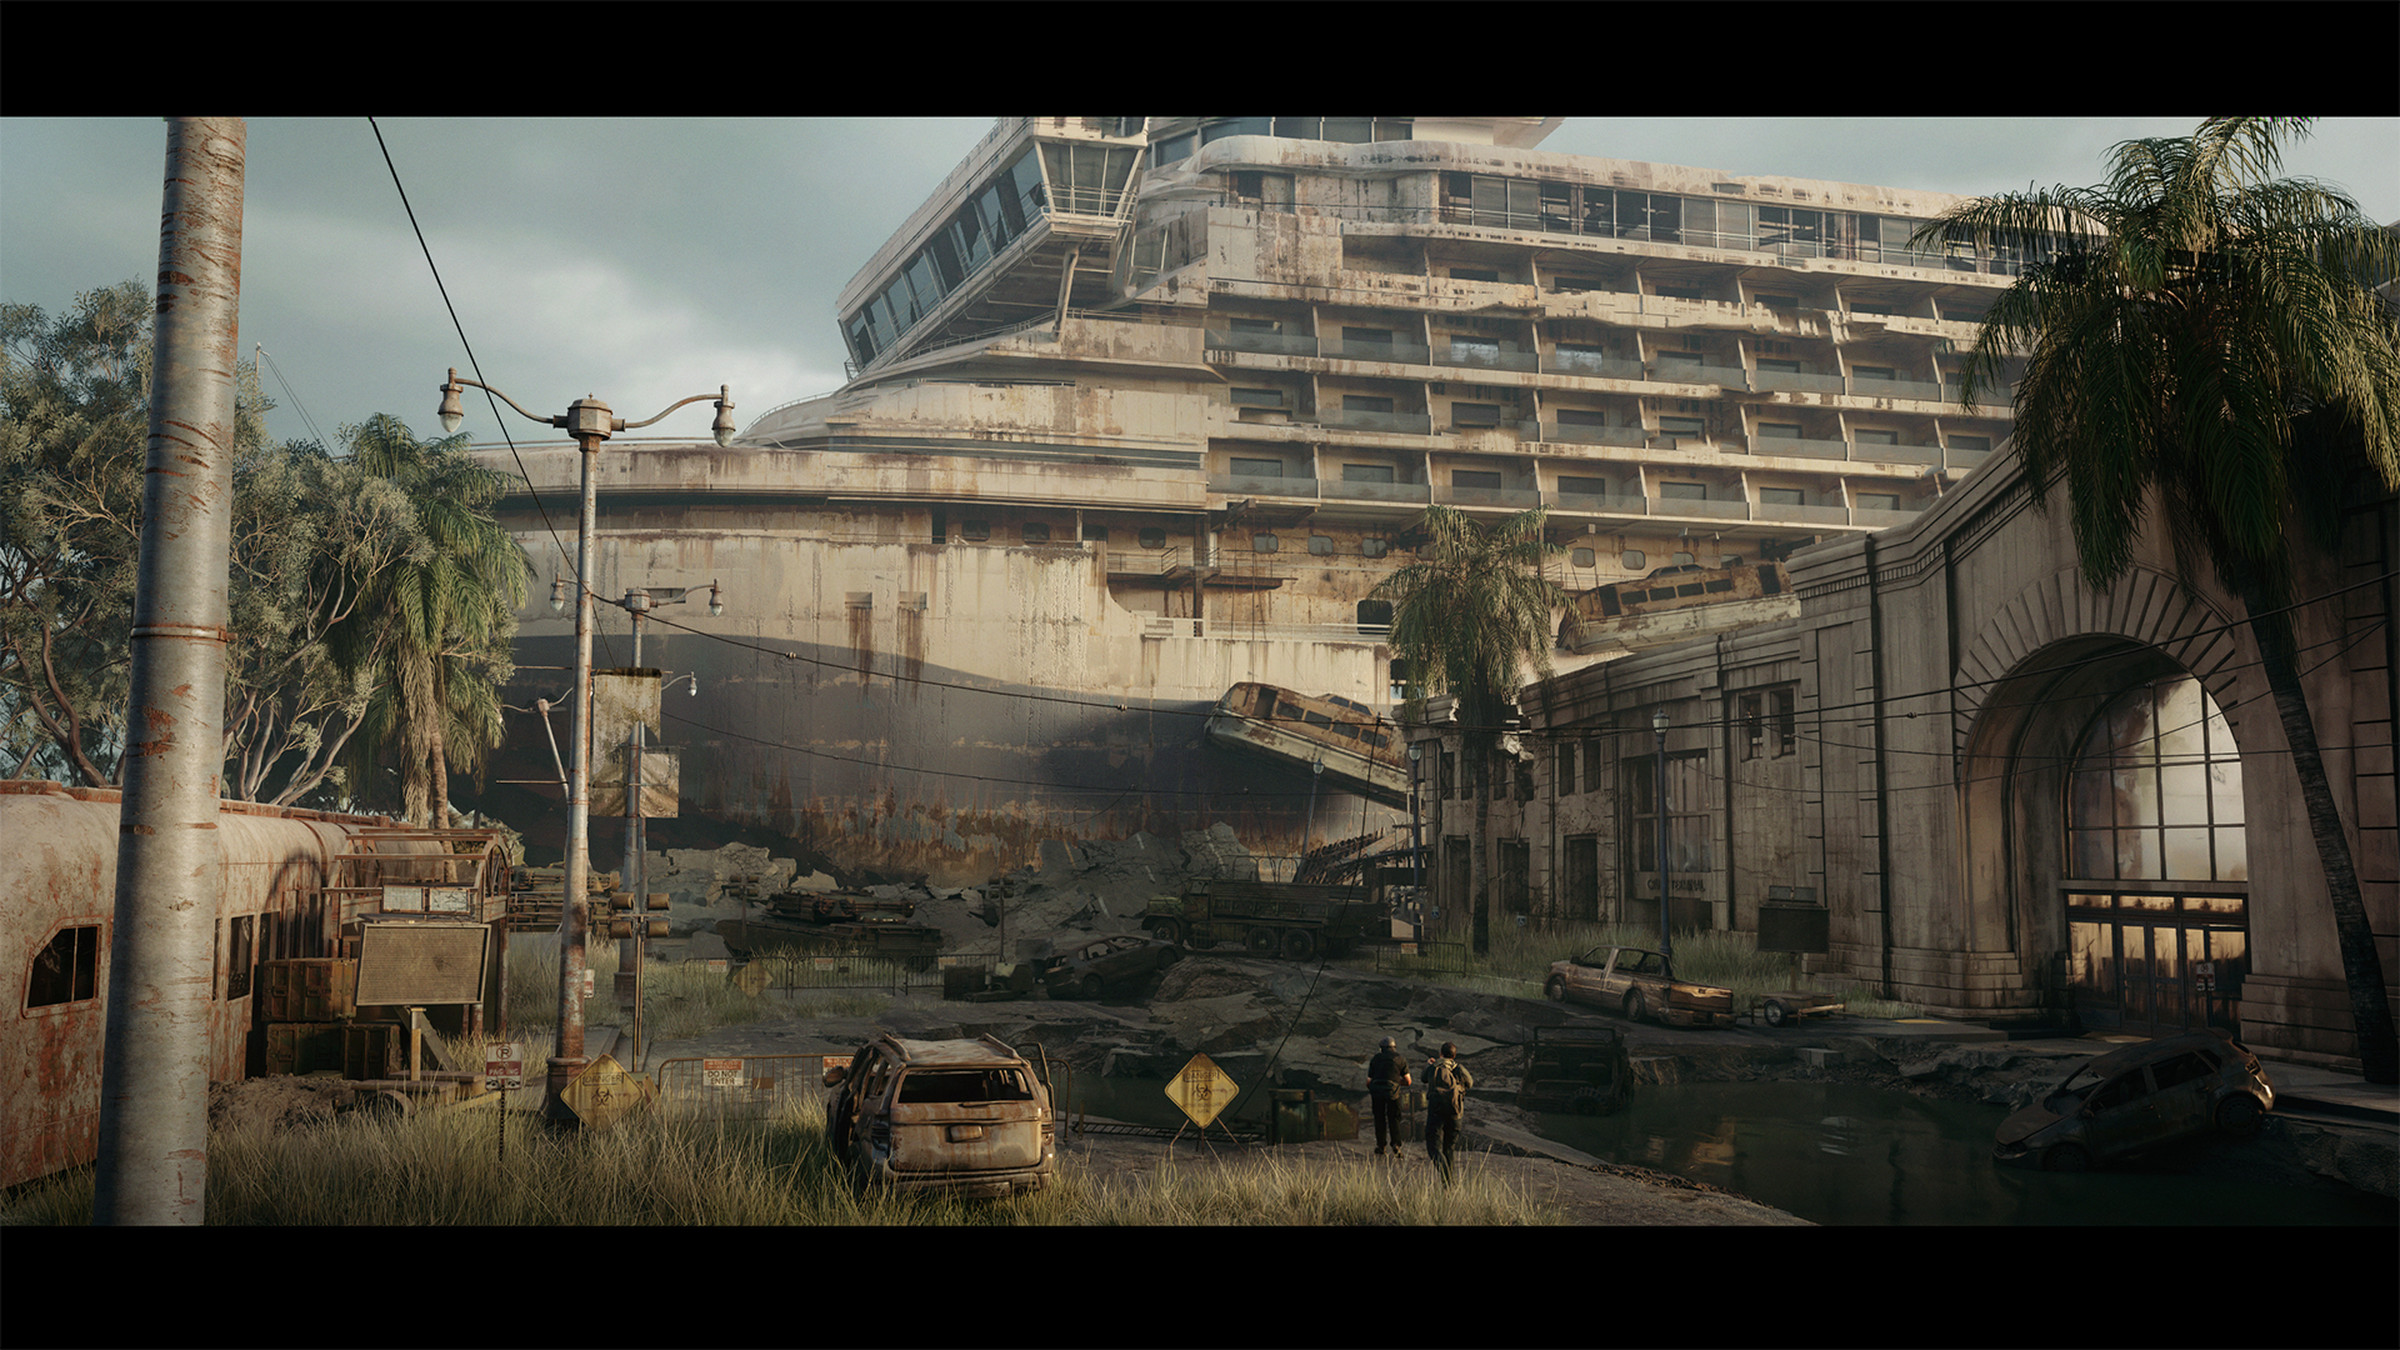 Screenshot from The Last Of Us multiplayer game featuring a crashed and decrepit cruise ship 